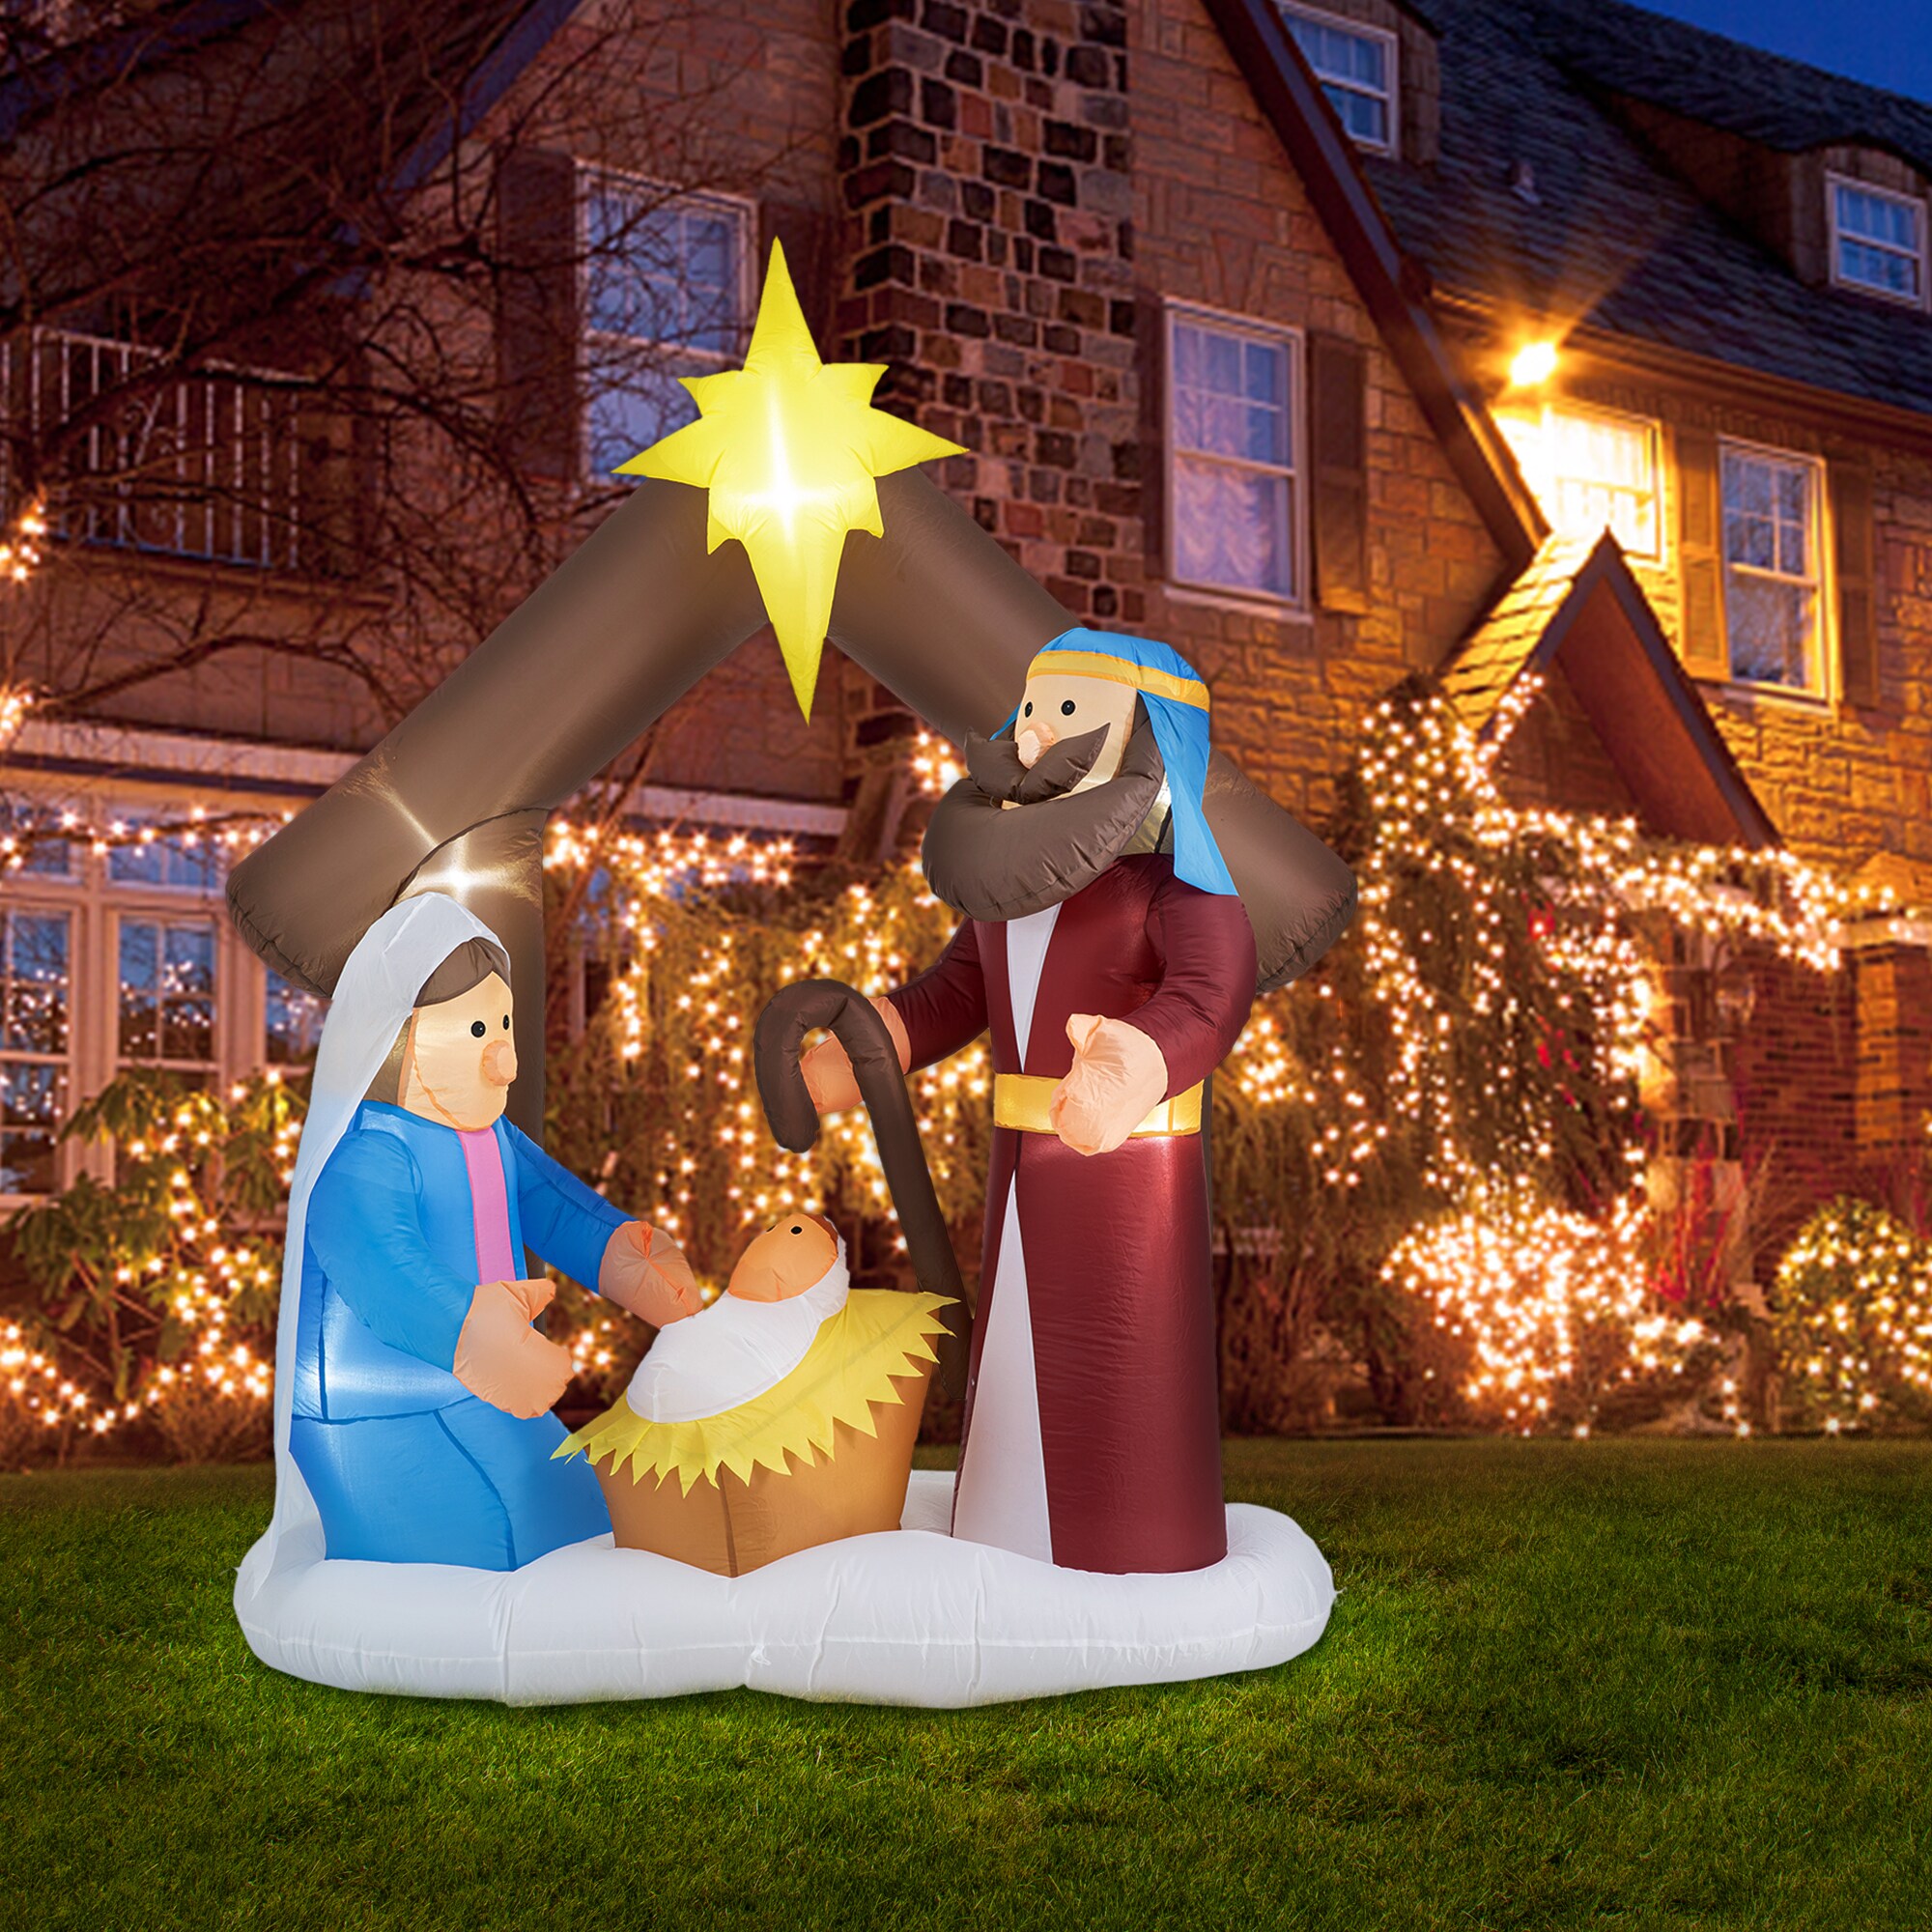 Nativity Christmas Inflatables at Lowes.com